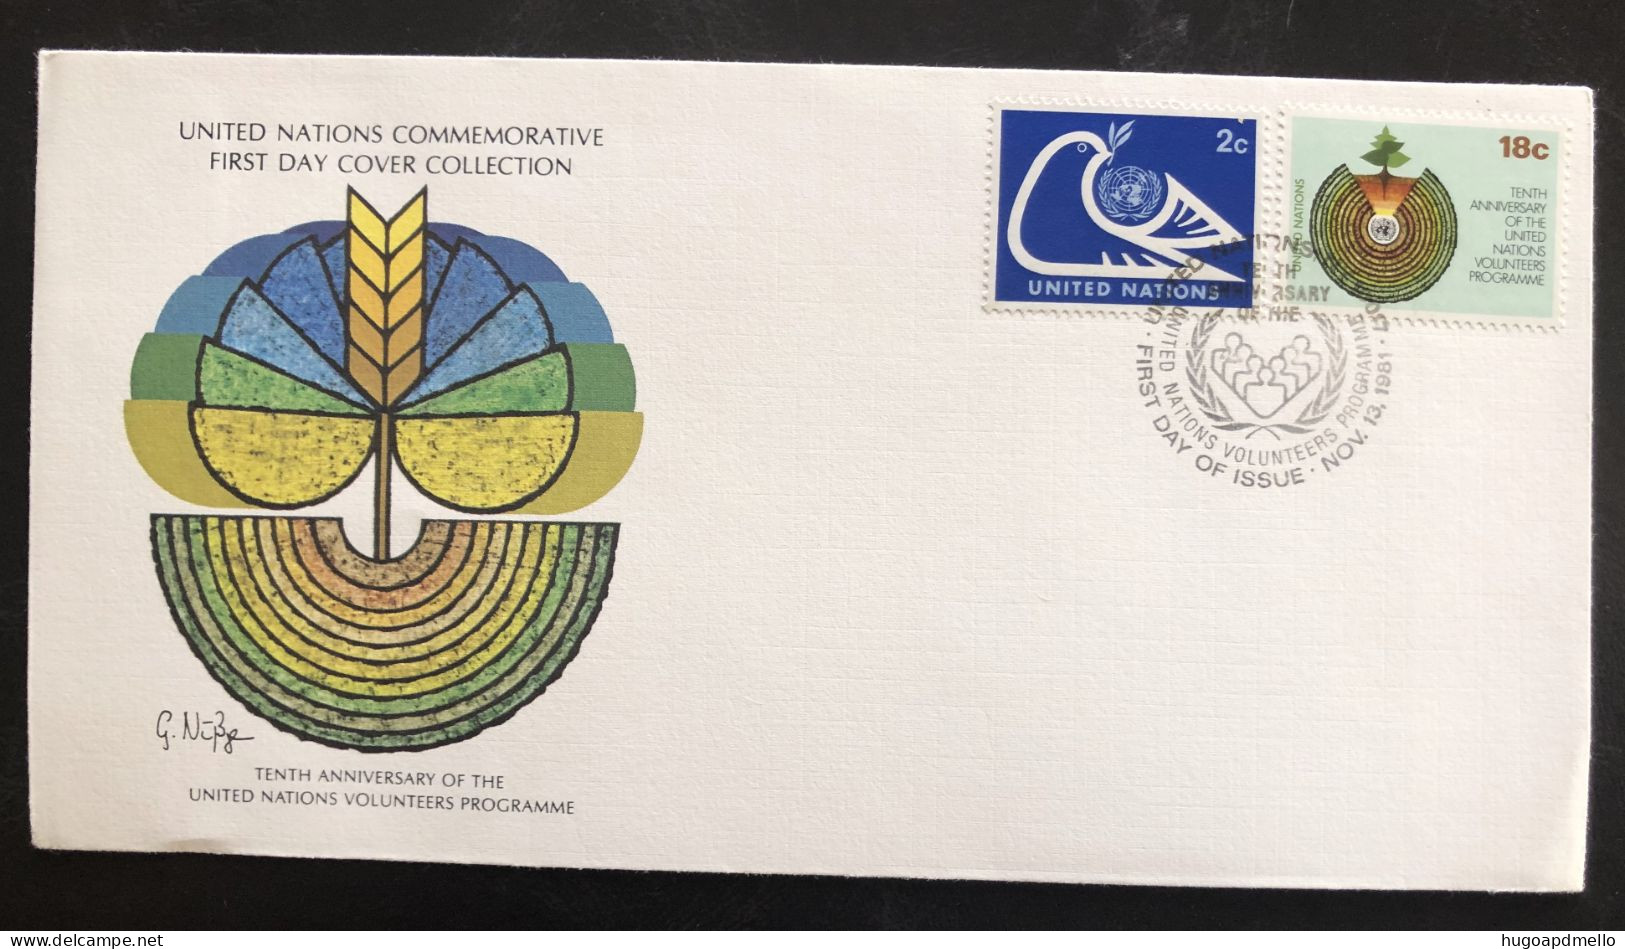 UNITED NATIONS, Uncirculated FDC « TENTH ANNIVERSARY OF THE UNITED NATIONS VOLUNTEERS PROGRAMME », 1981 - ONU